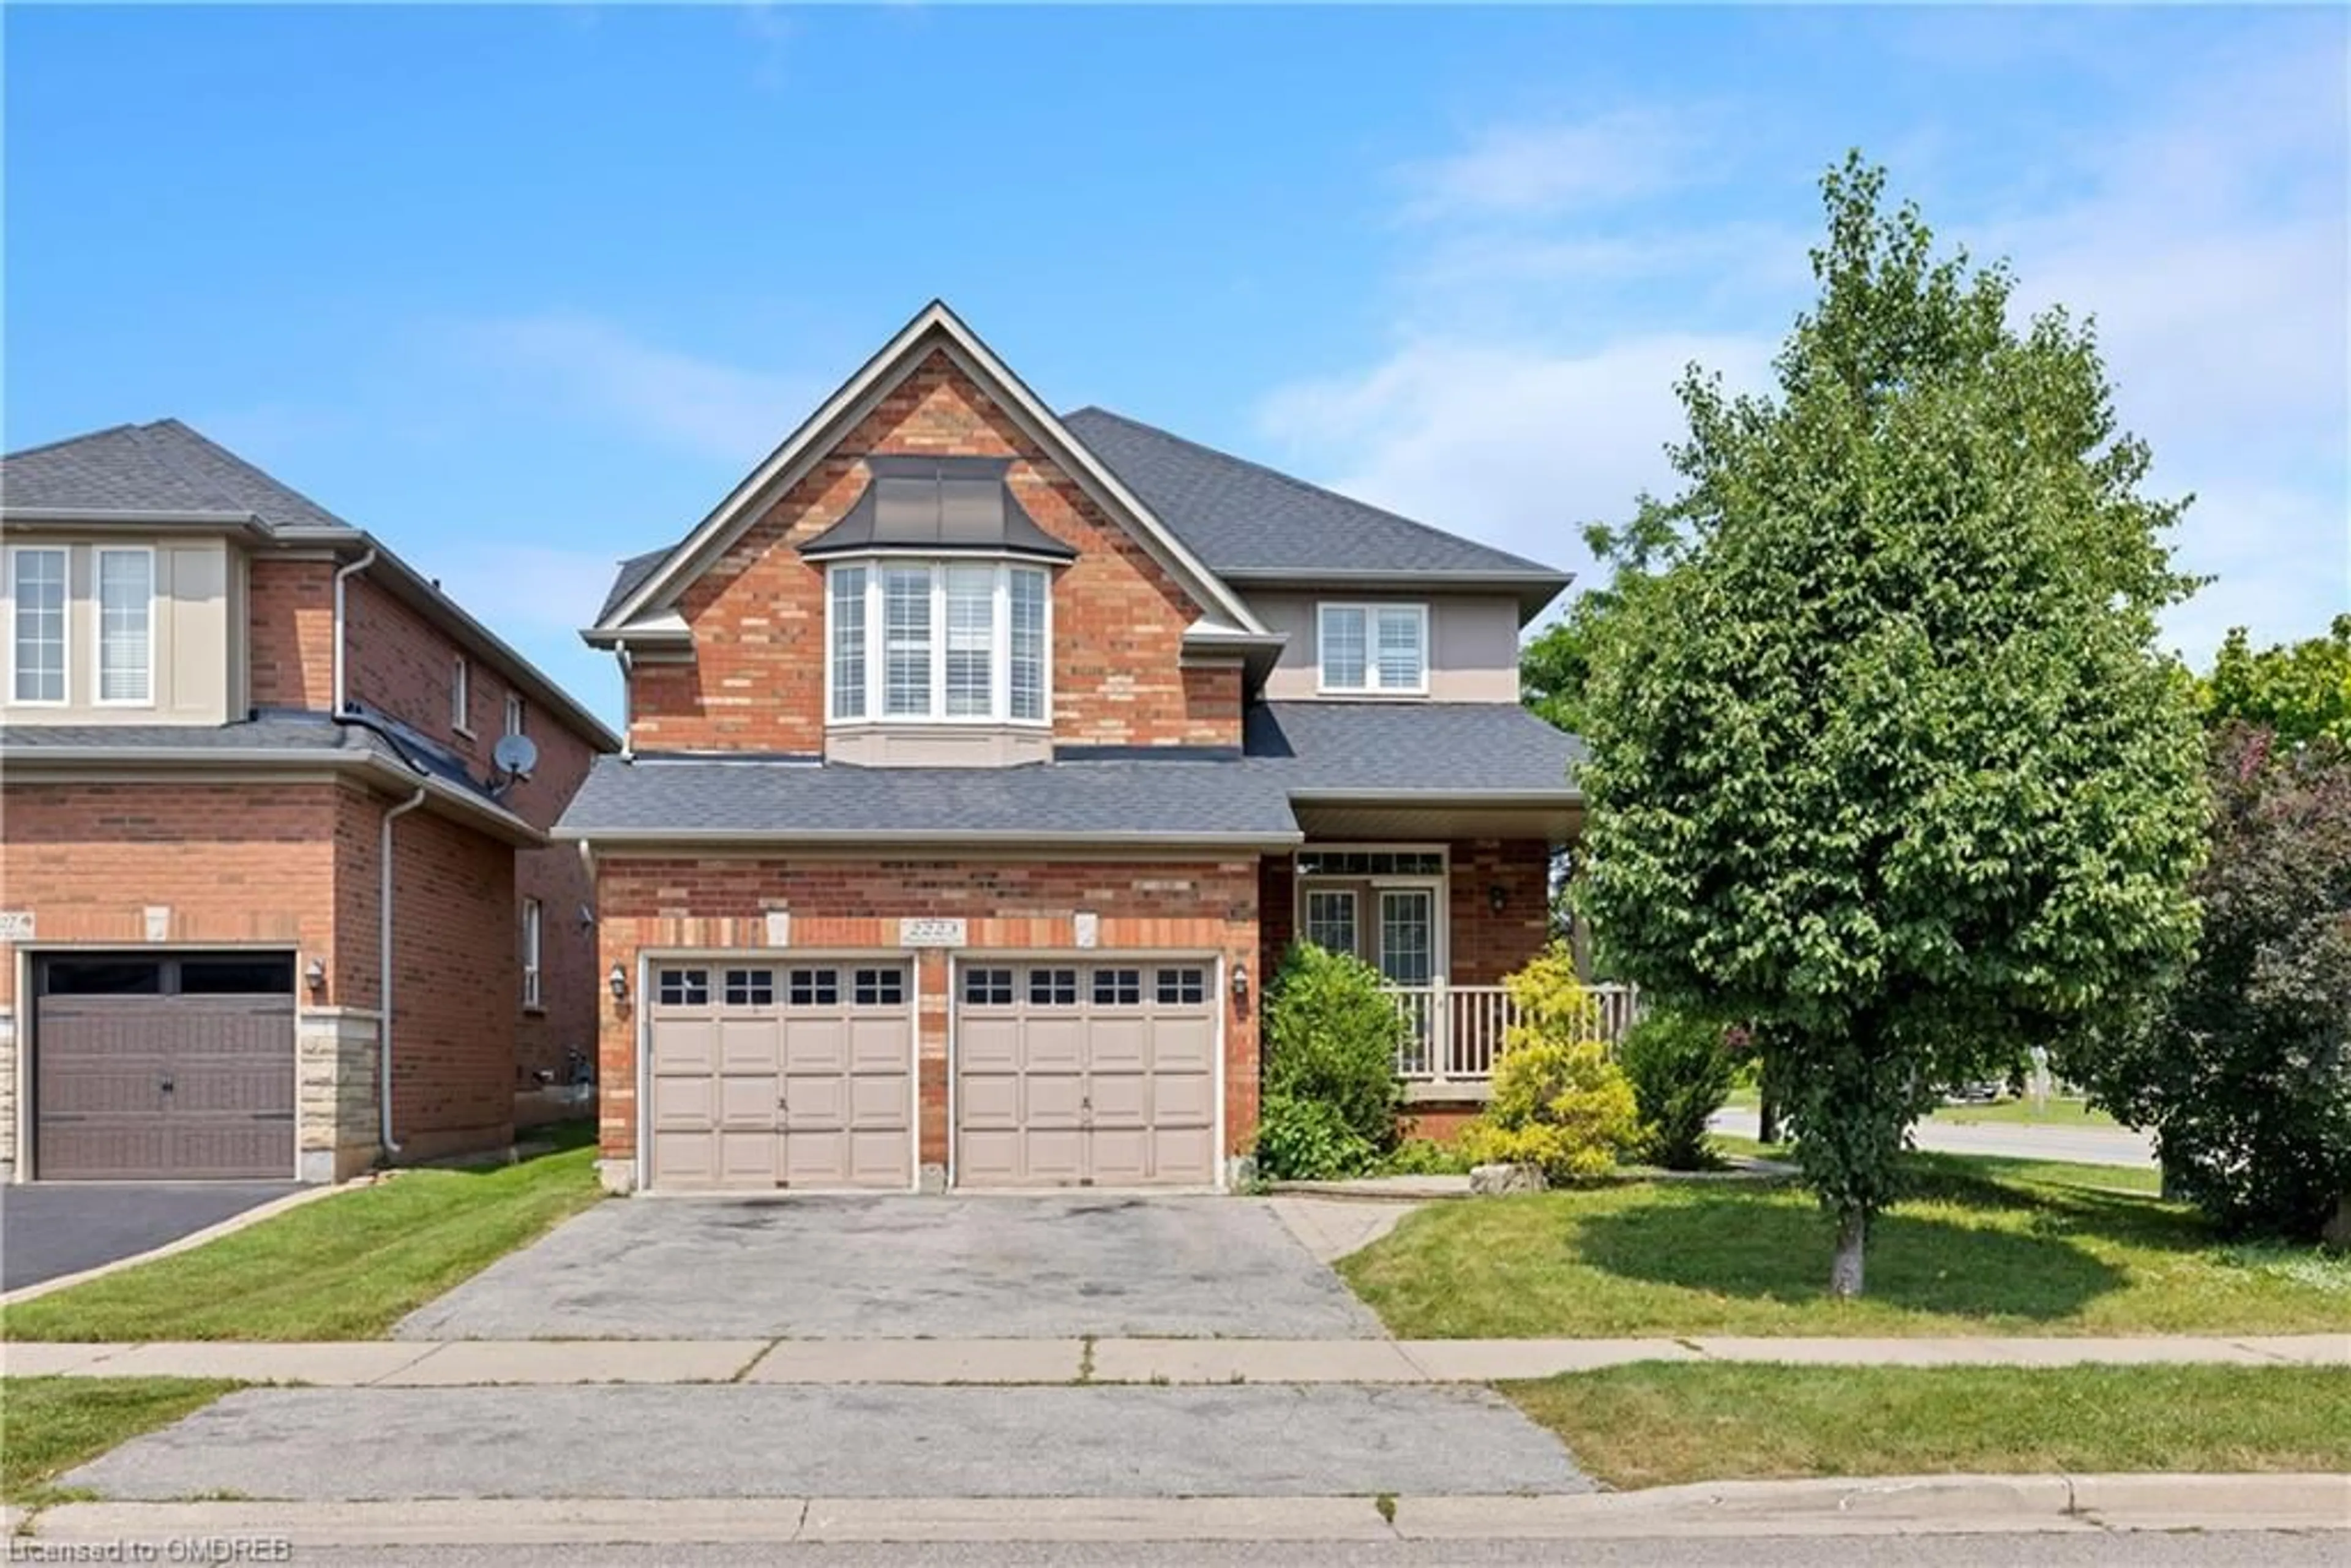 Home with brick exterior material for 2223 Whistling Springs Cres, Oakville Ontario L6M 5G5